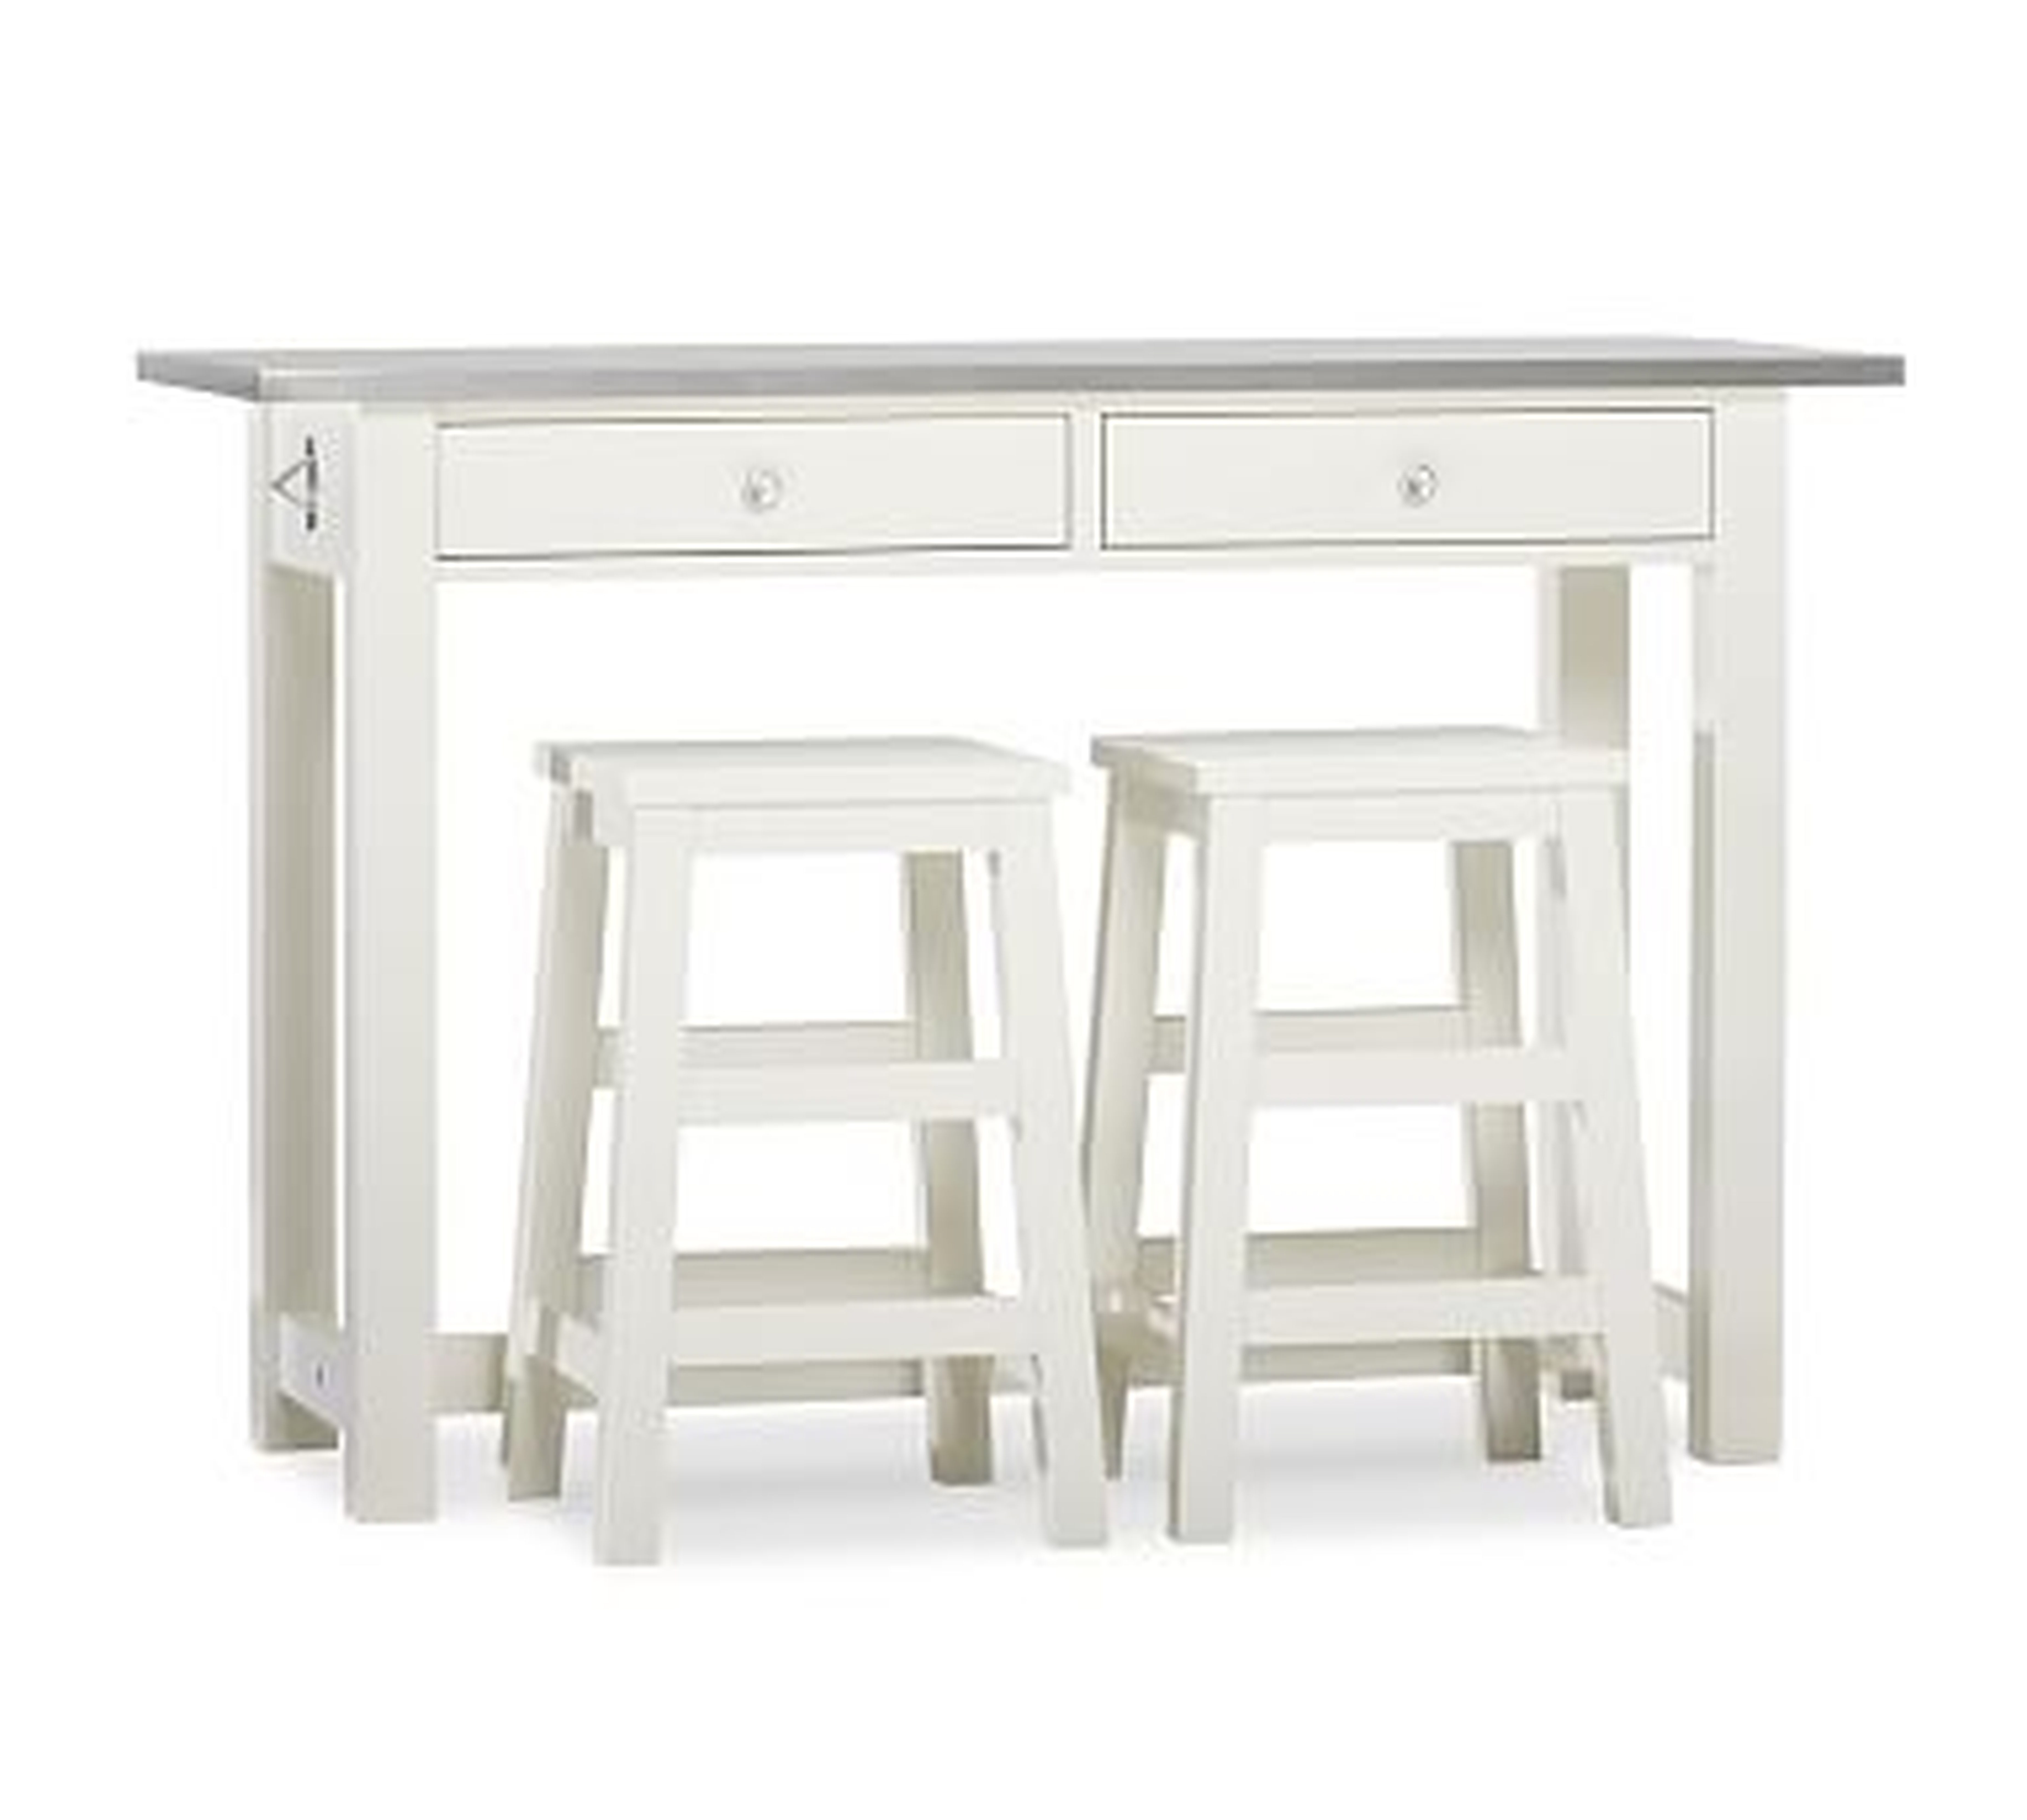 BALBOA WOOD & STAINLESS STEEL COUNTER-HEIGHT TABLE W/ 2 STOOLS, WHITE - Pottery Barn